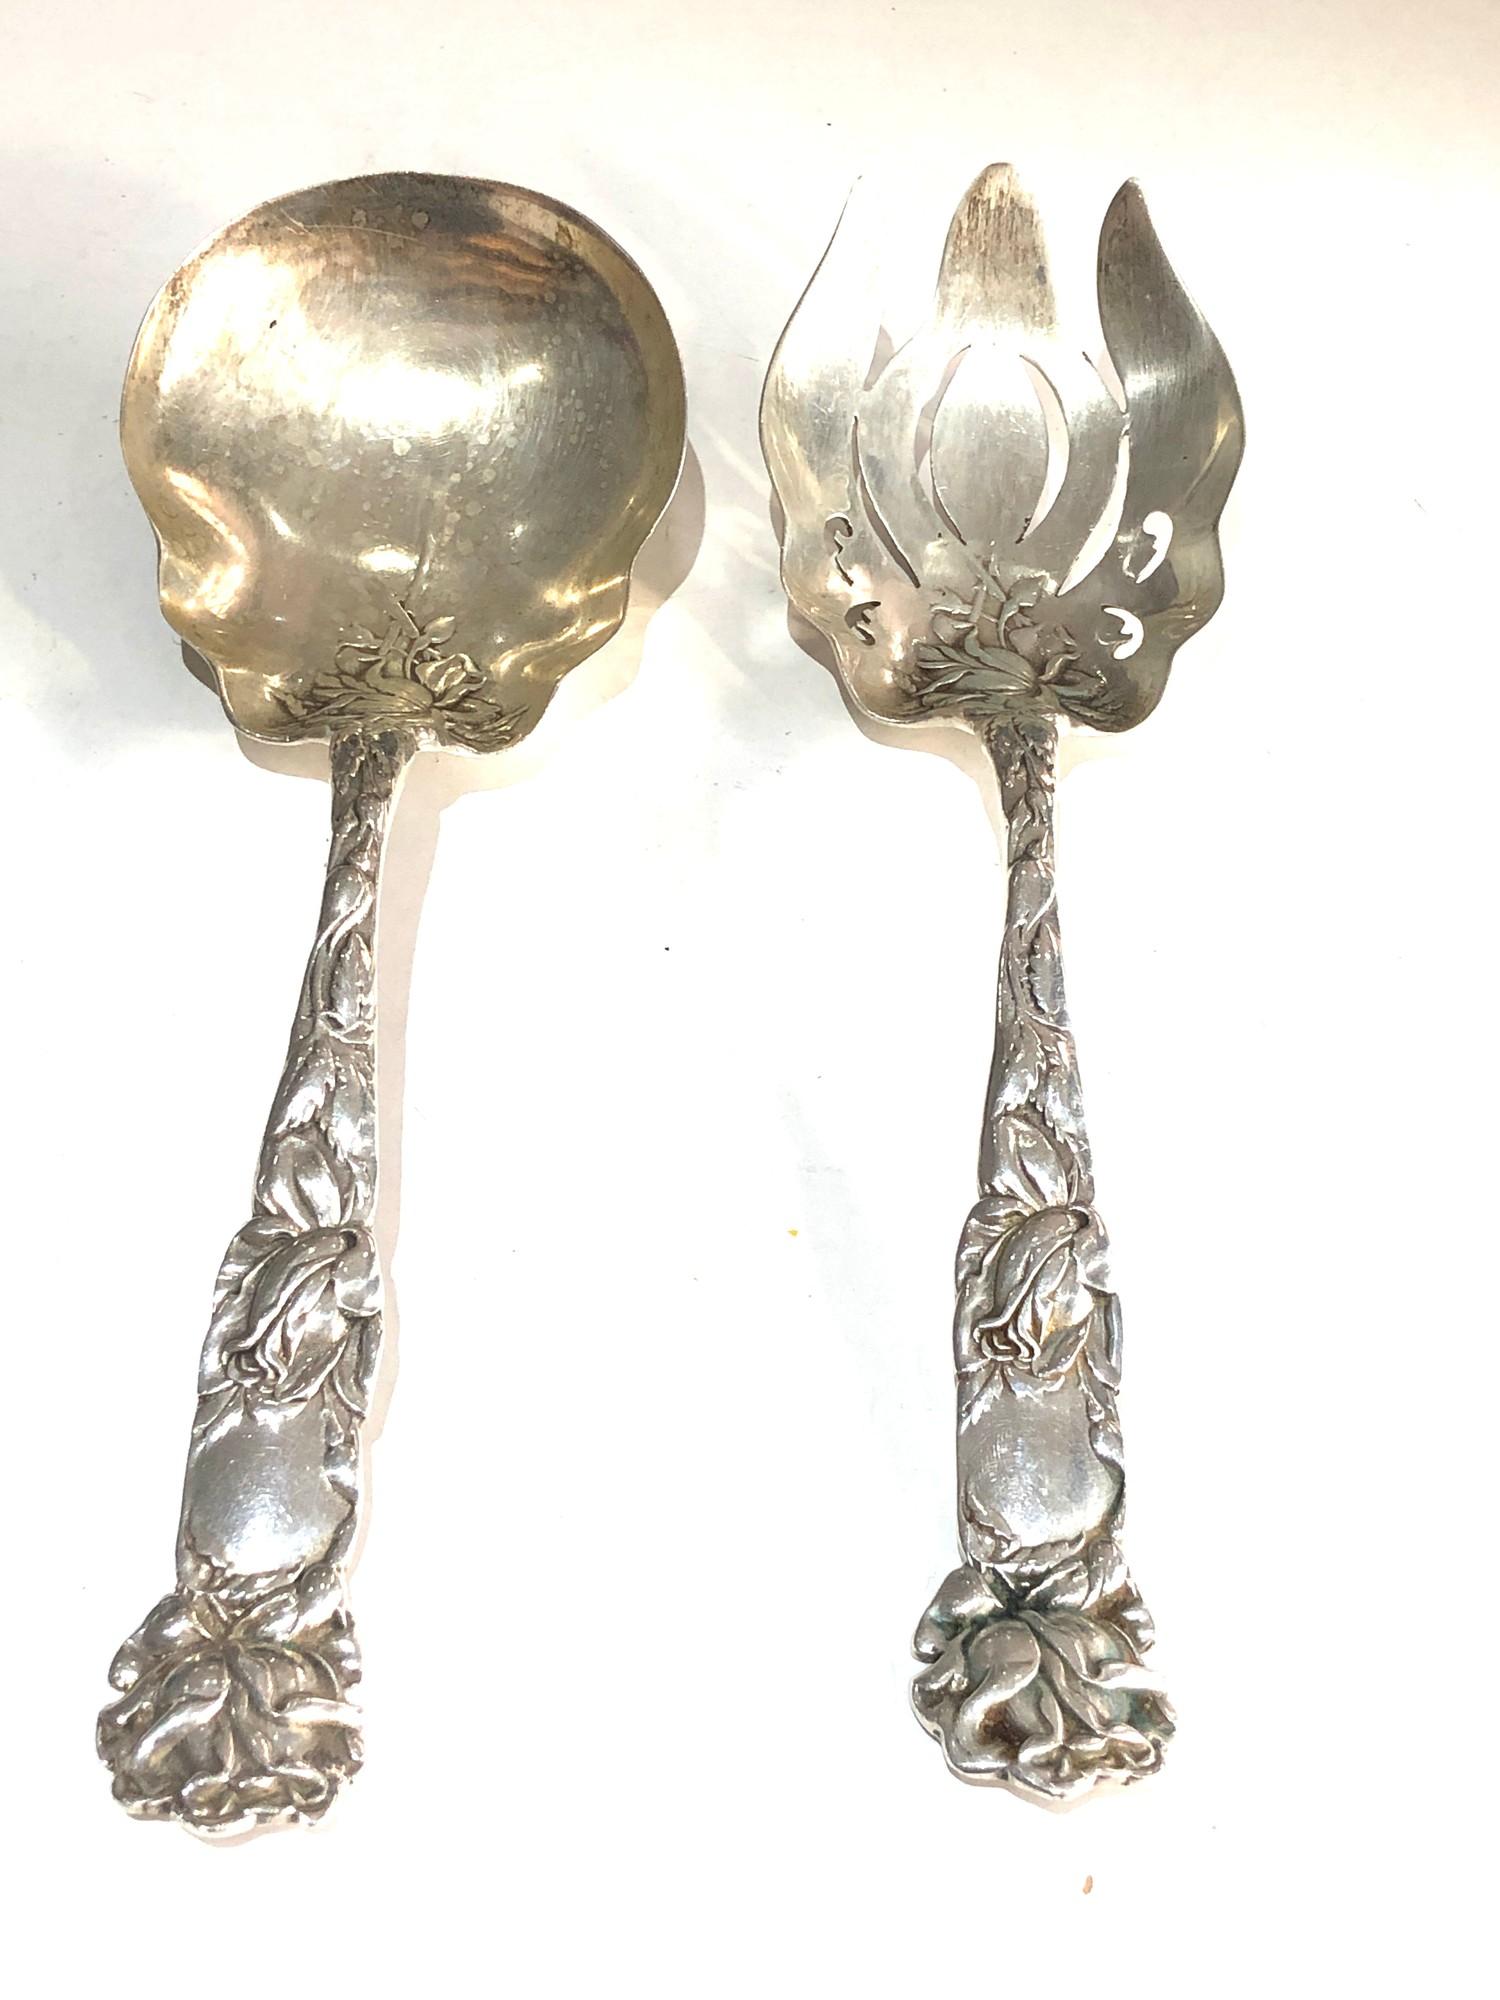 pair of ornate sterling silver servers with floral decoration measure approx 23cm long weight 200g